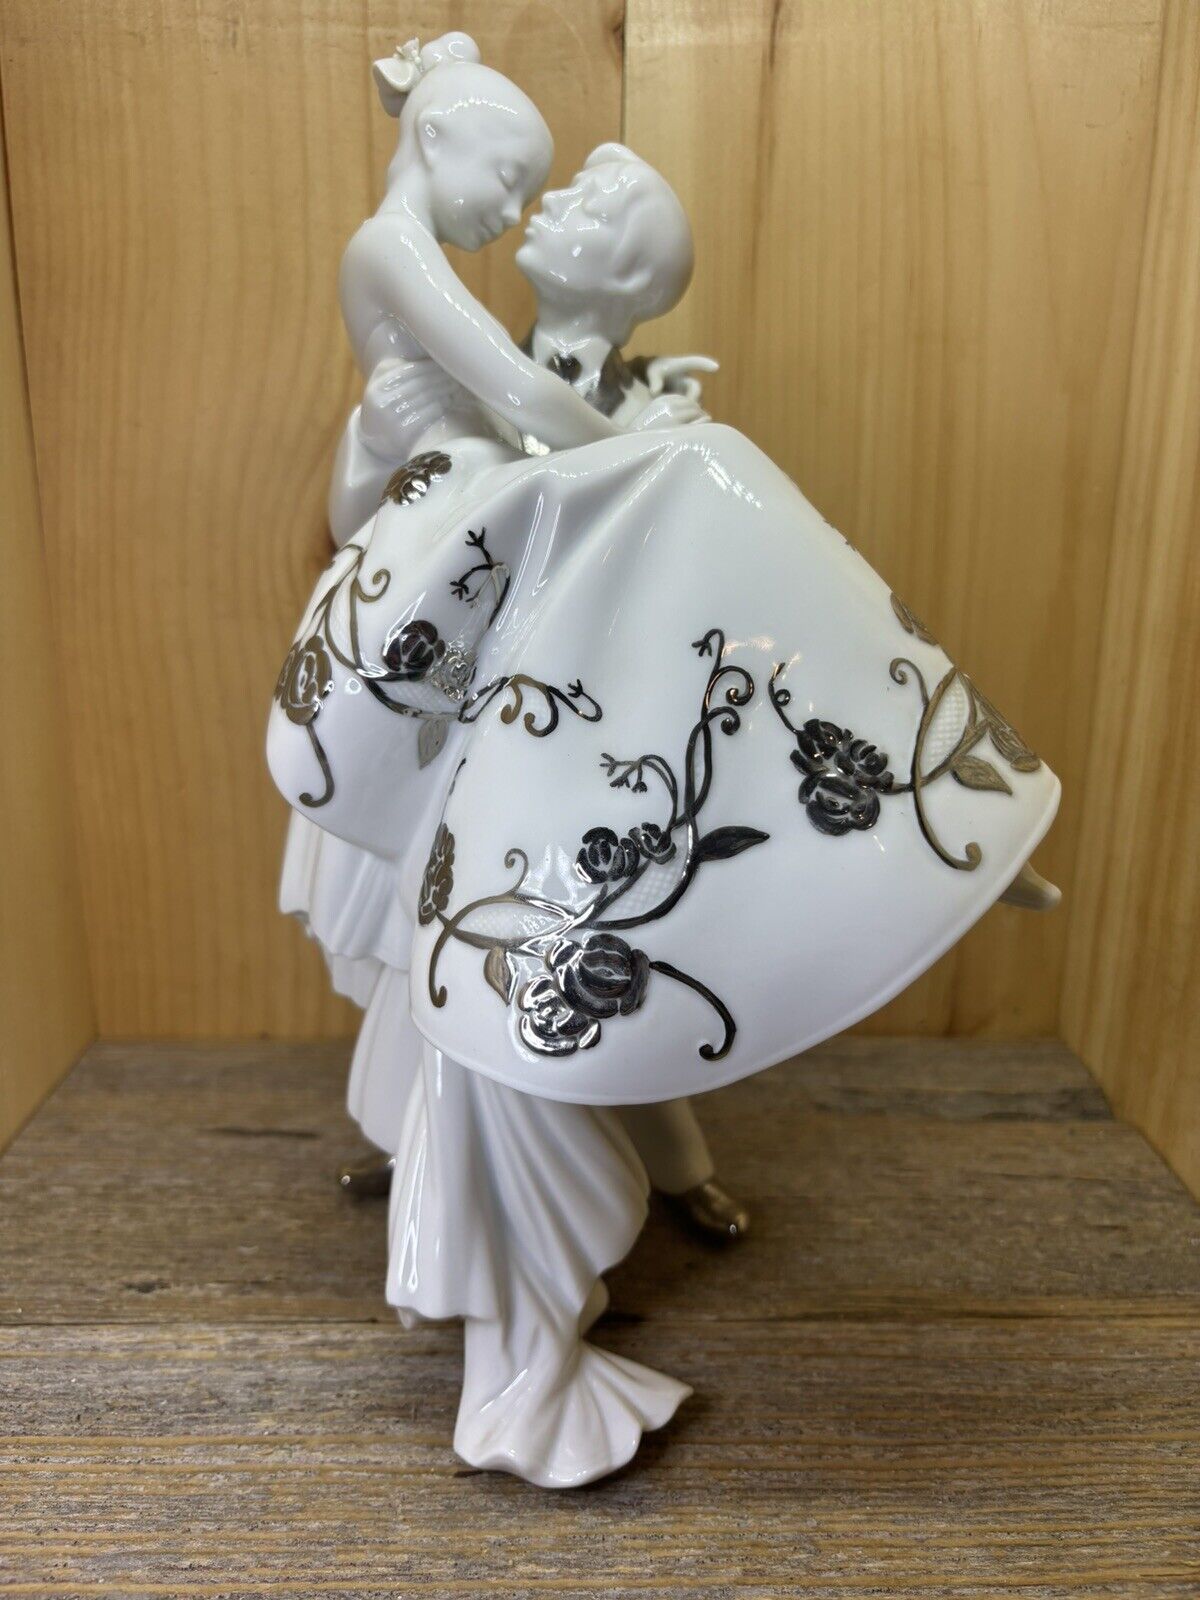 Lladro The Happiest Day Porcelain Figurine Re-Deco Husband Wife Wedding 01007055